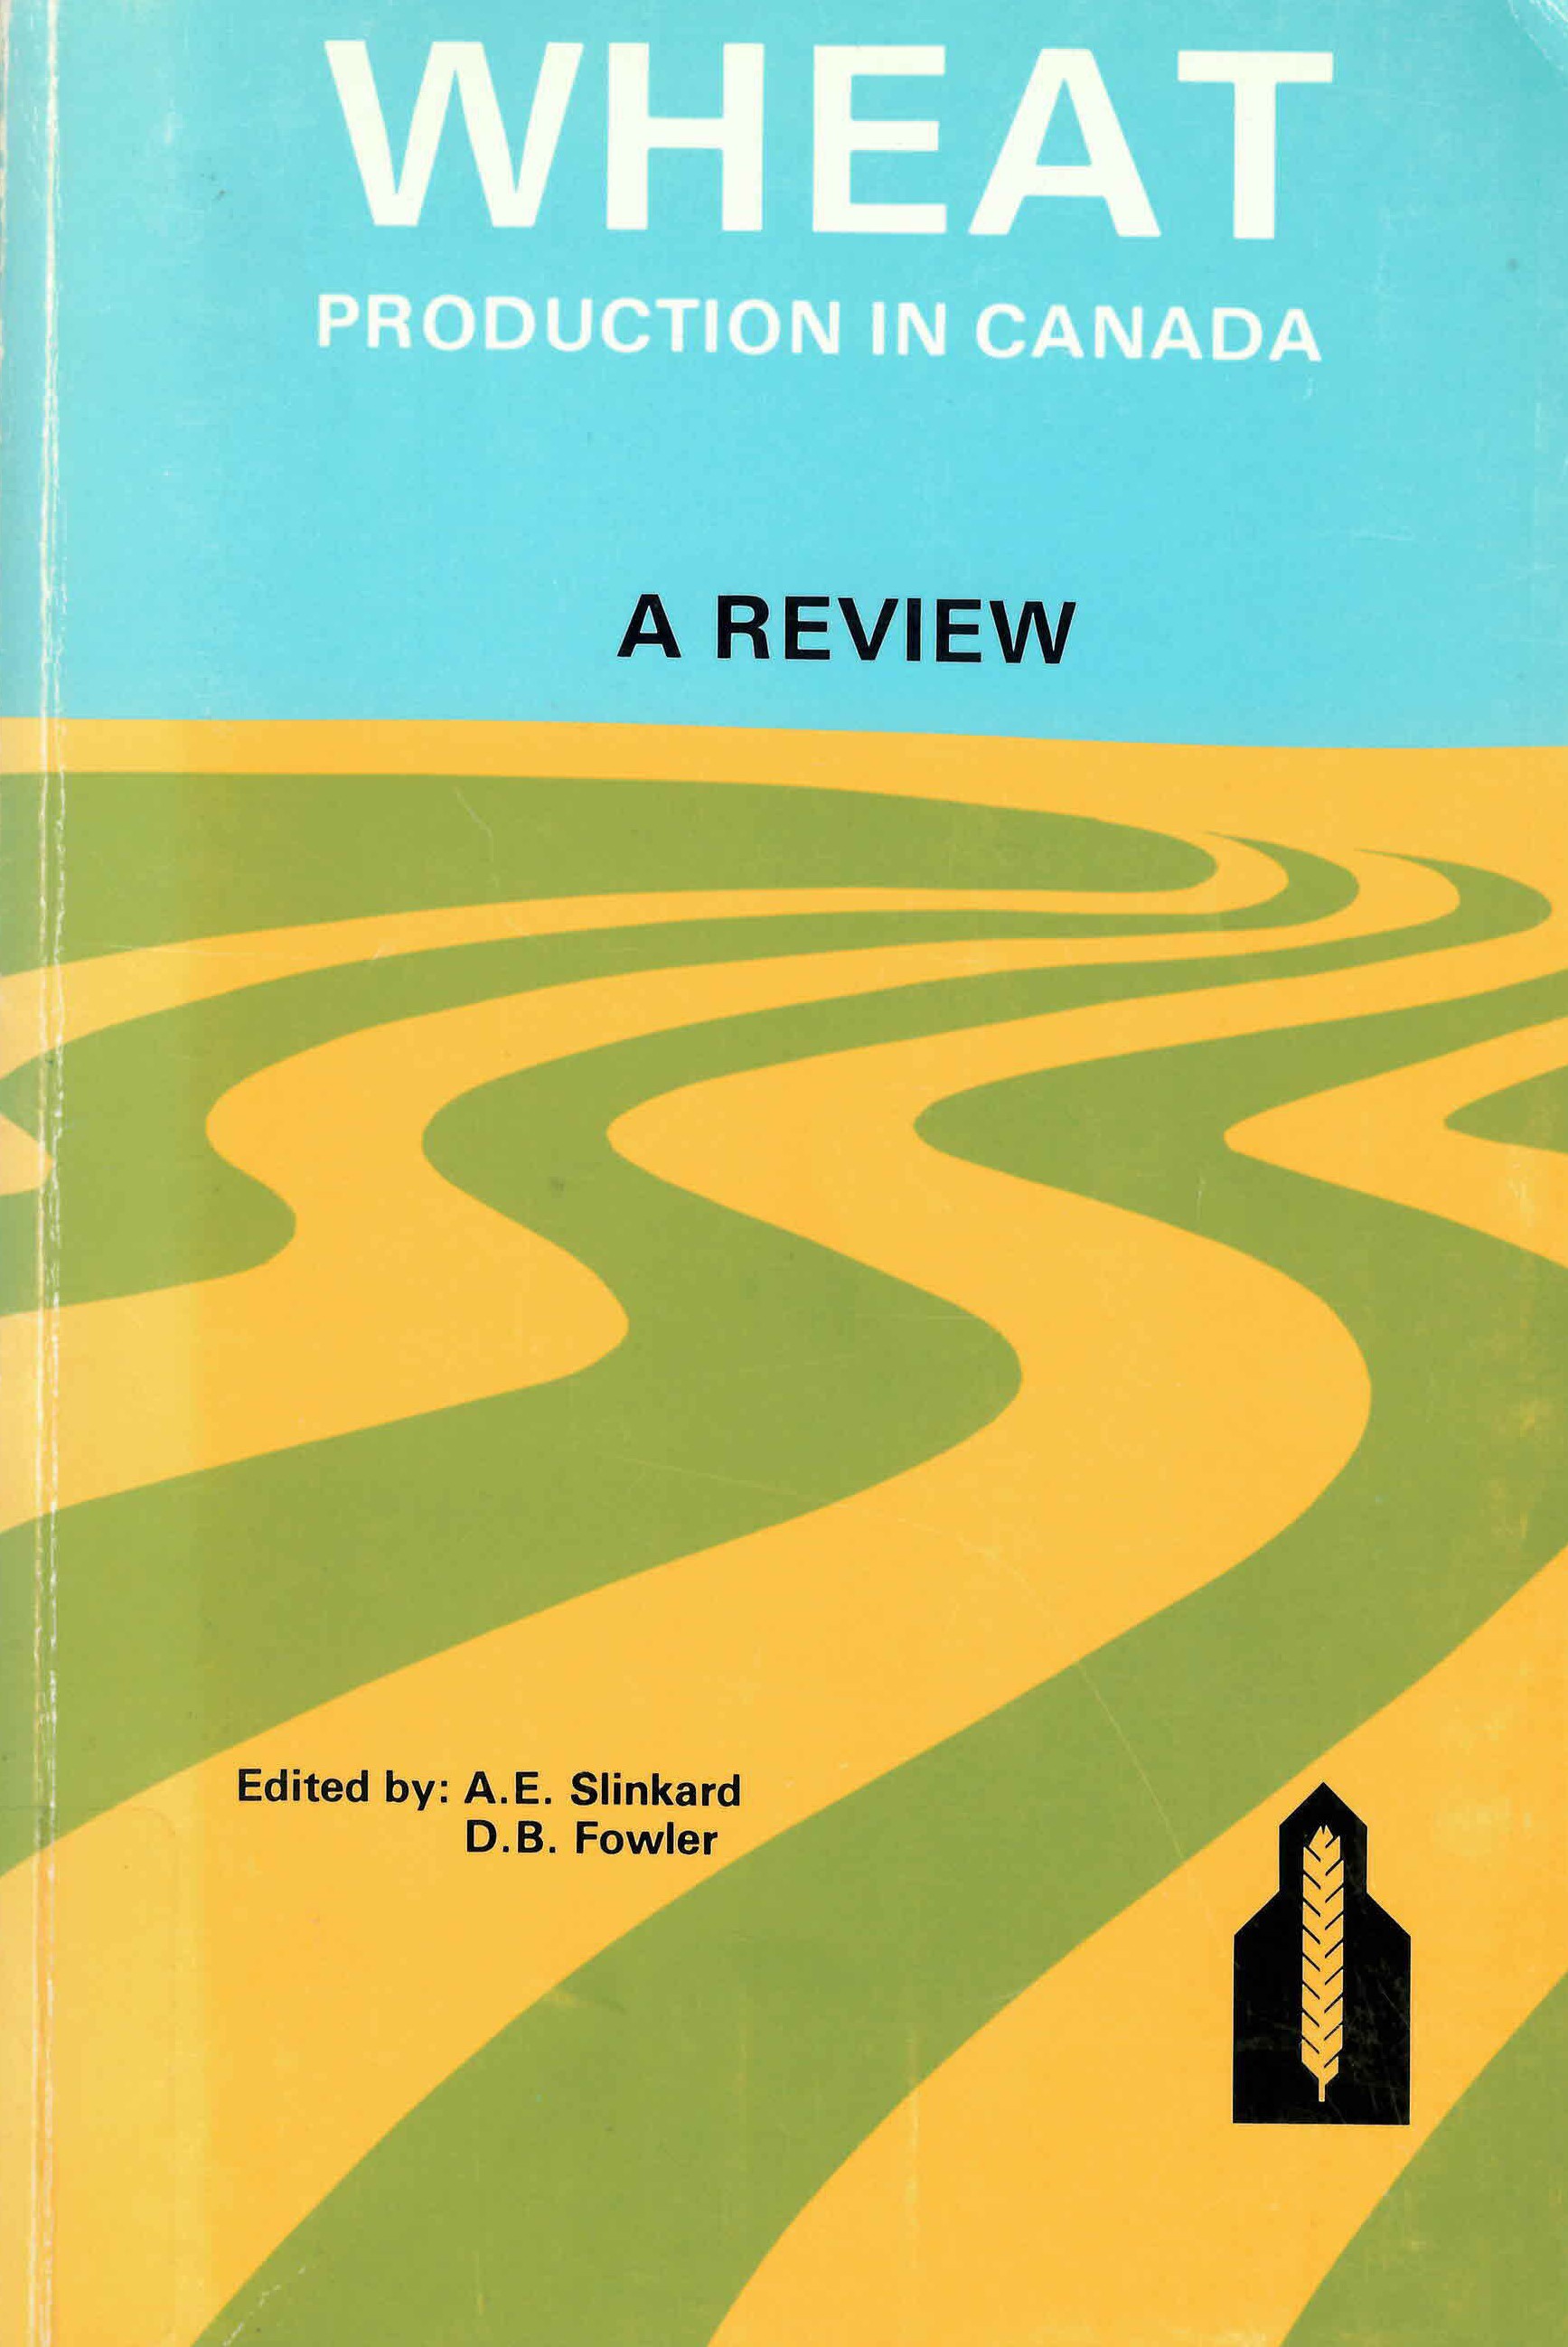 Wheat production in Canada a review : edited by A.E. Slinkard and D.B. Fowler